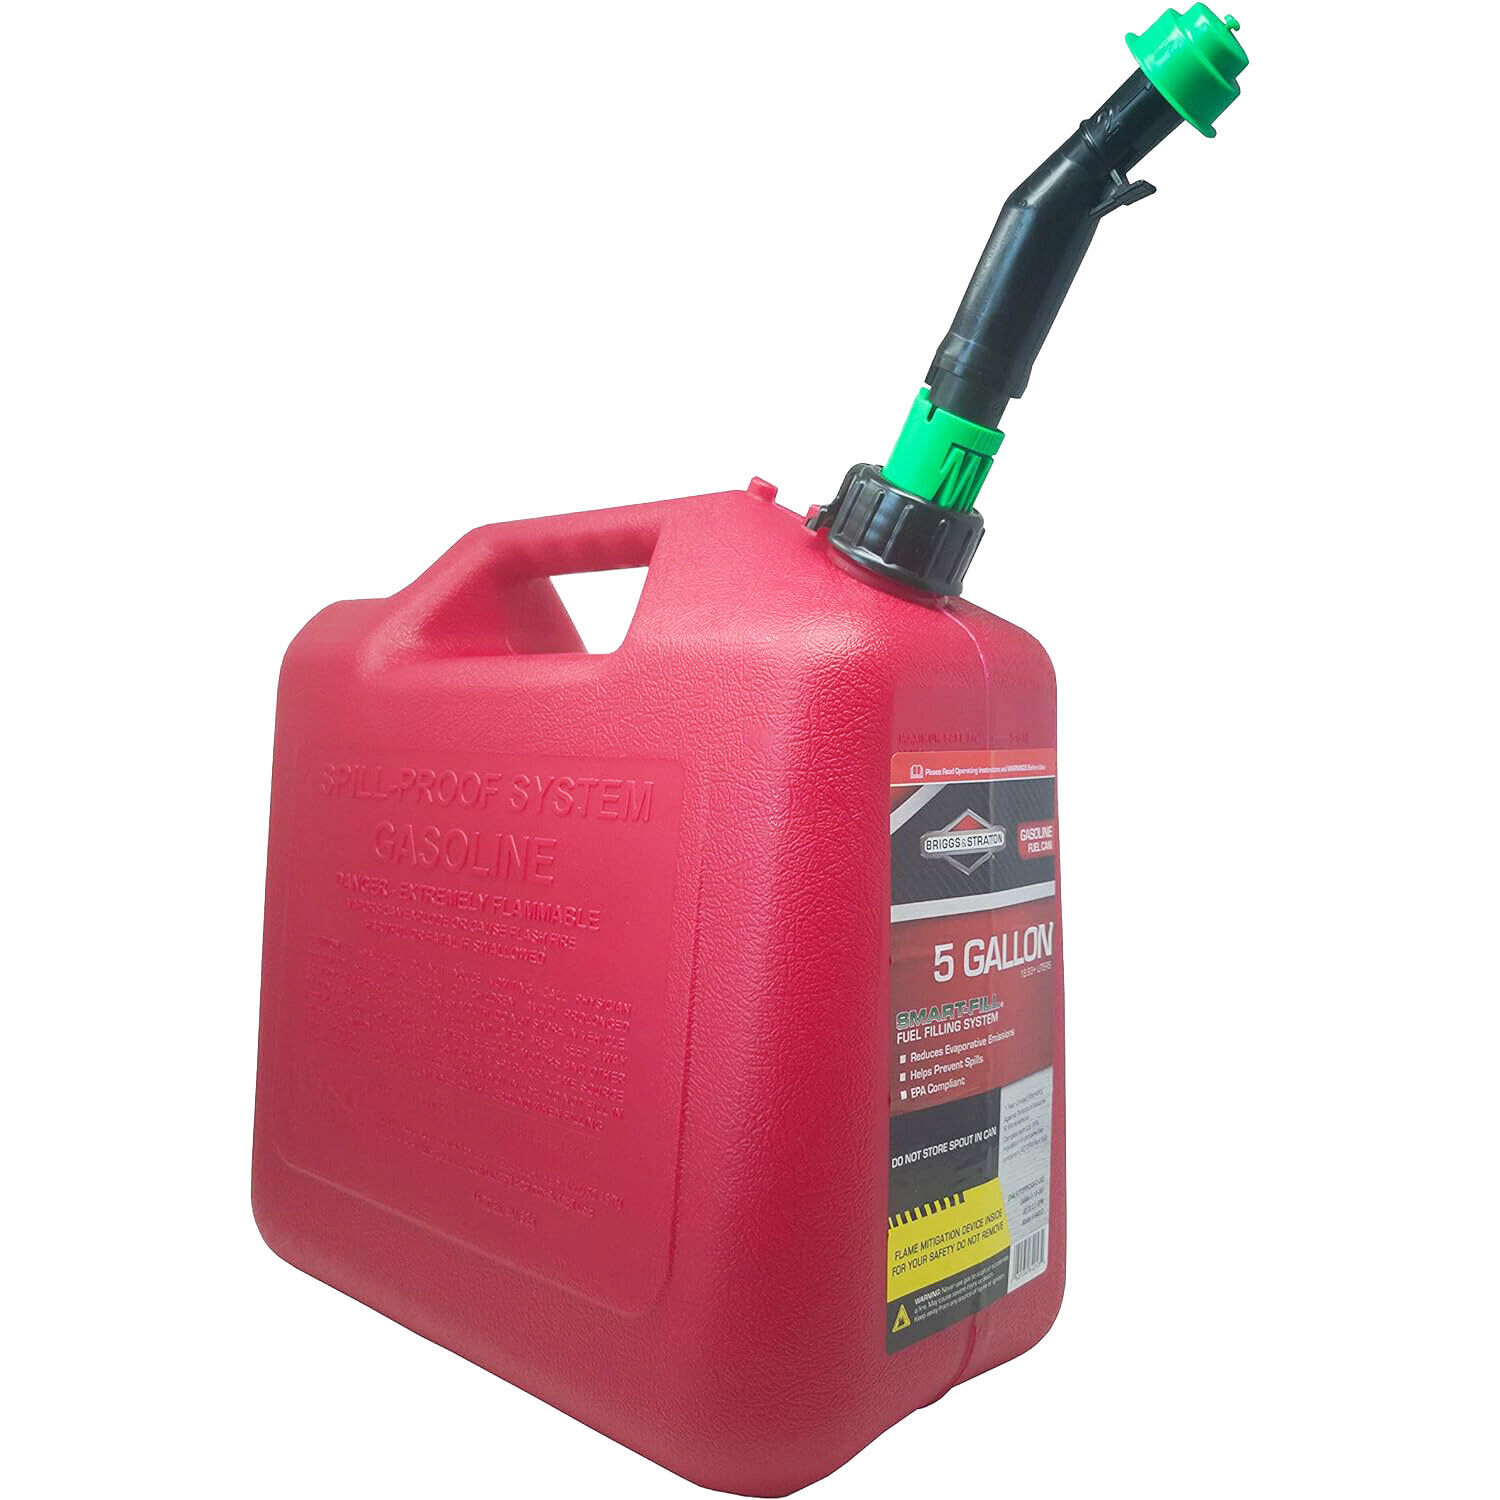 Briggs & Stratton Gas Can, 5 Gallon Red Gas Can with Smart Fill Gas Can Spout.